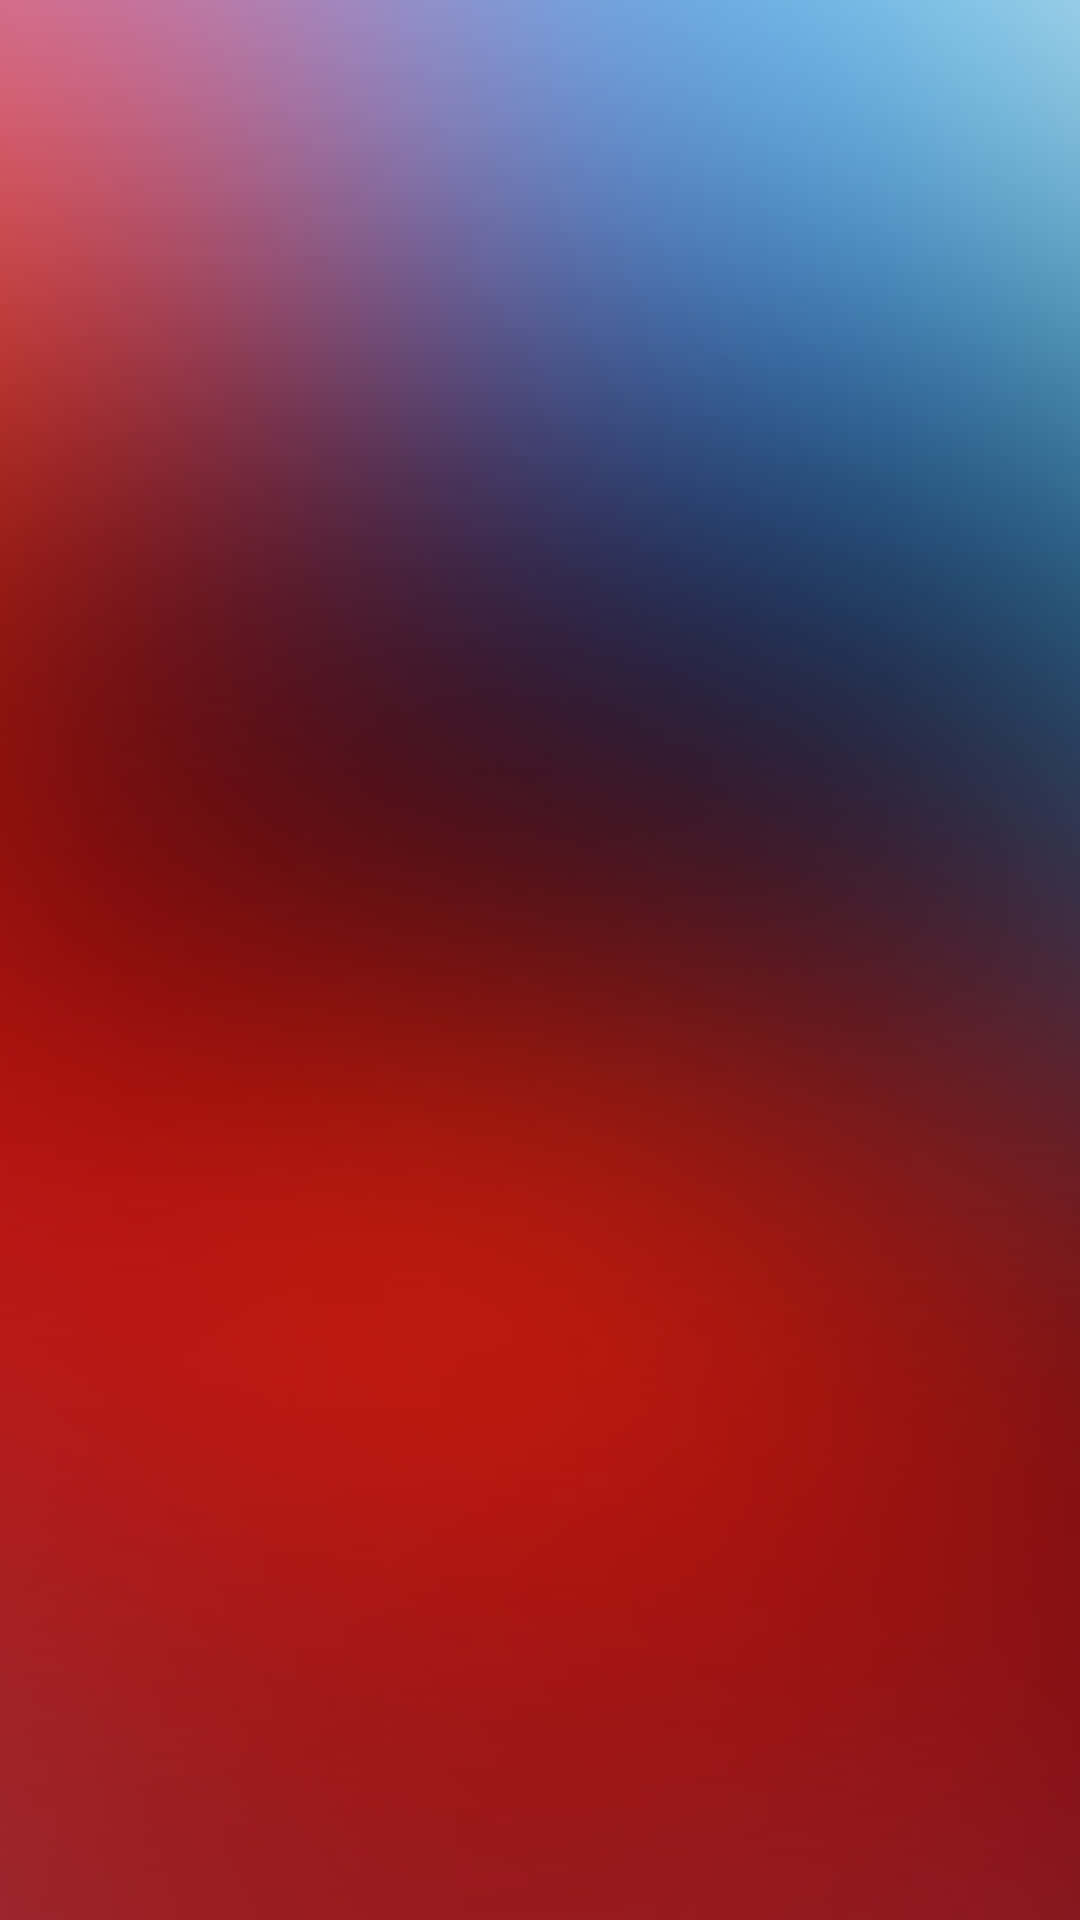 Style&Protection come together with this red&blue iPhone Wallpaper